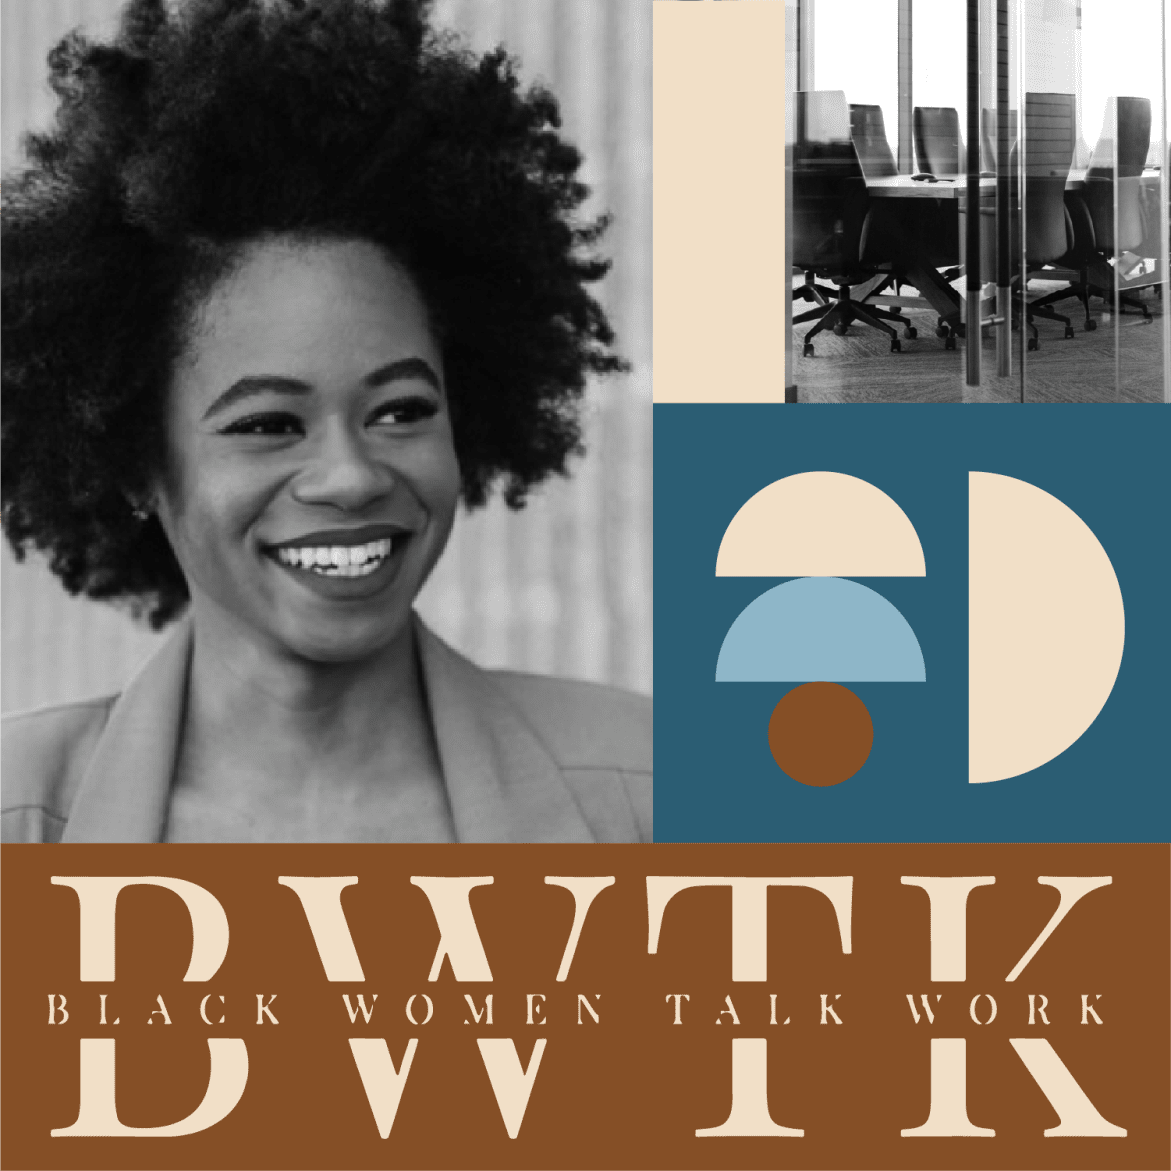 Black Podcasting - Ep 41: A Conversation On Embracing Our Money Stories With Rebecca Walker, Feminist and Author Of WOMEN TALK MONEY: Breaking the Taboo